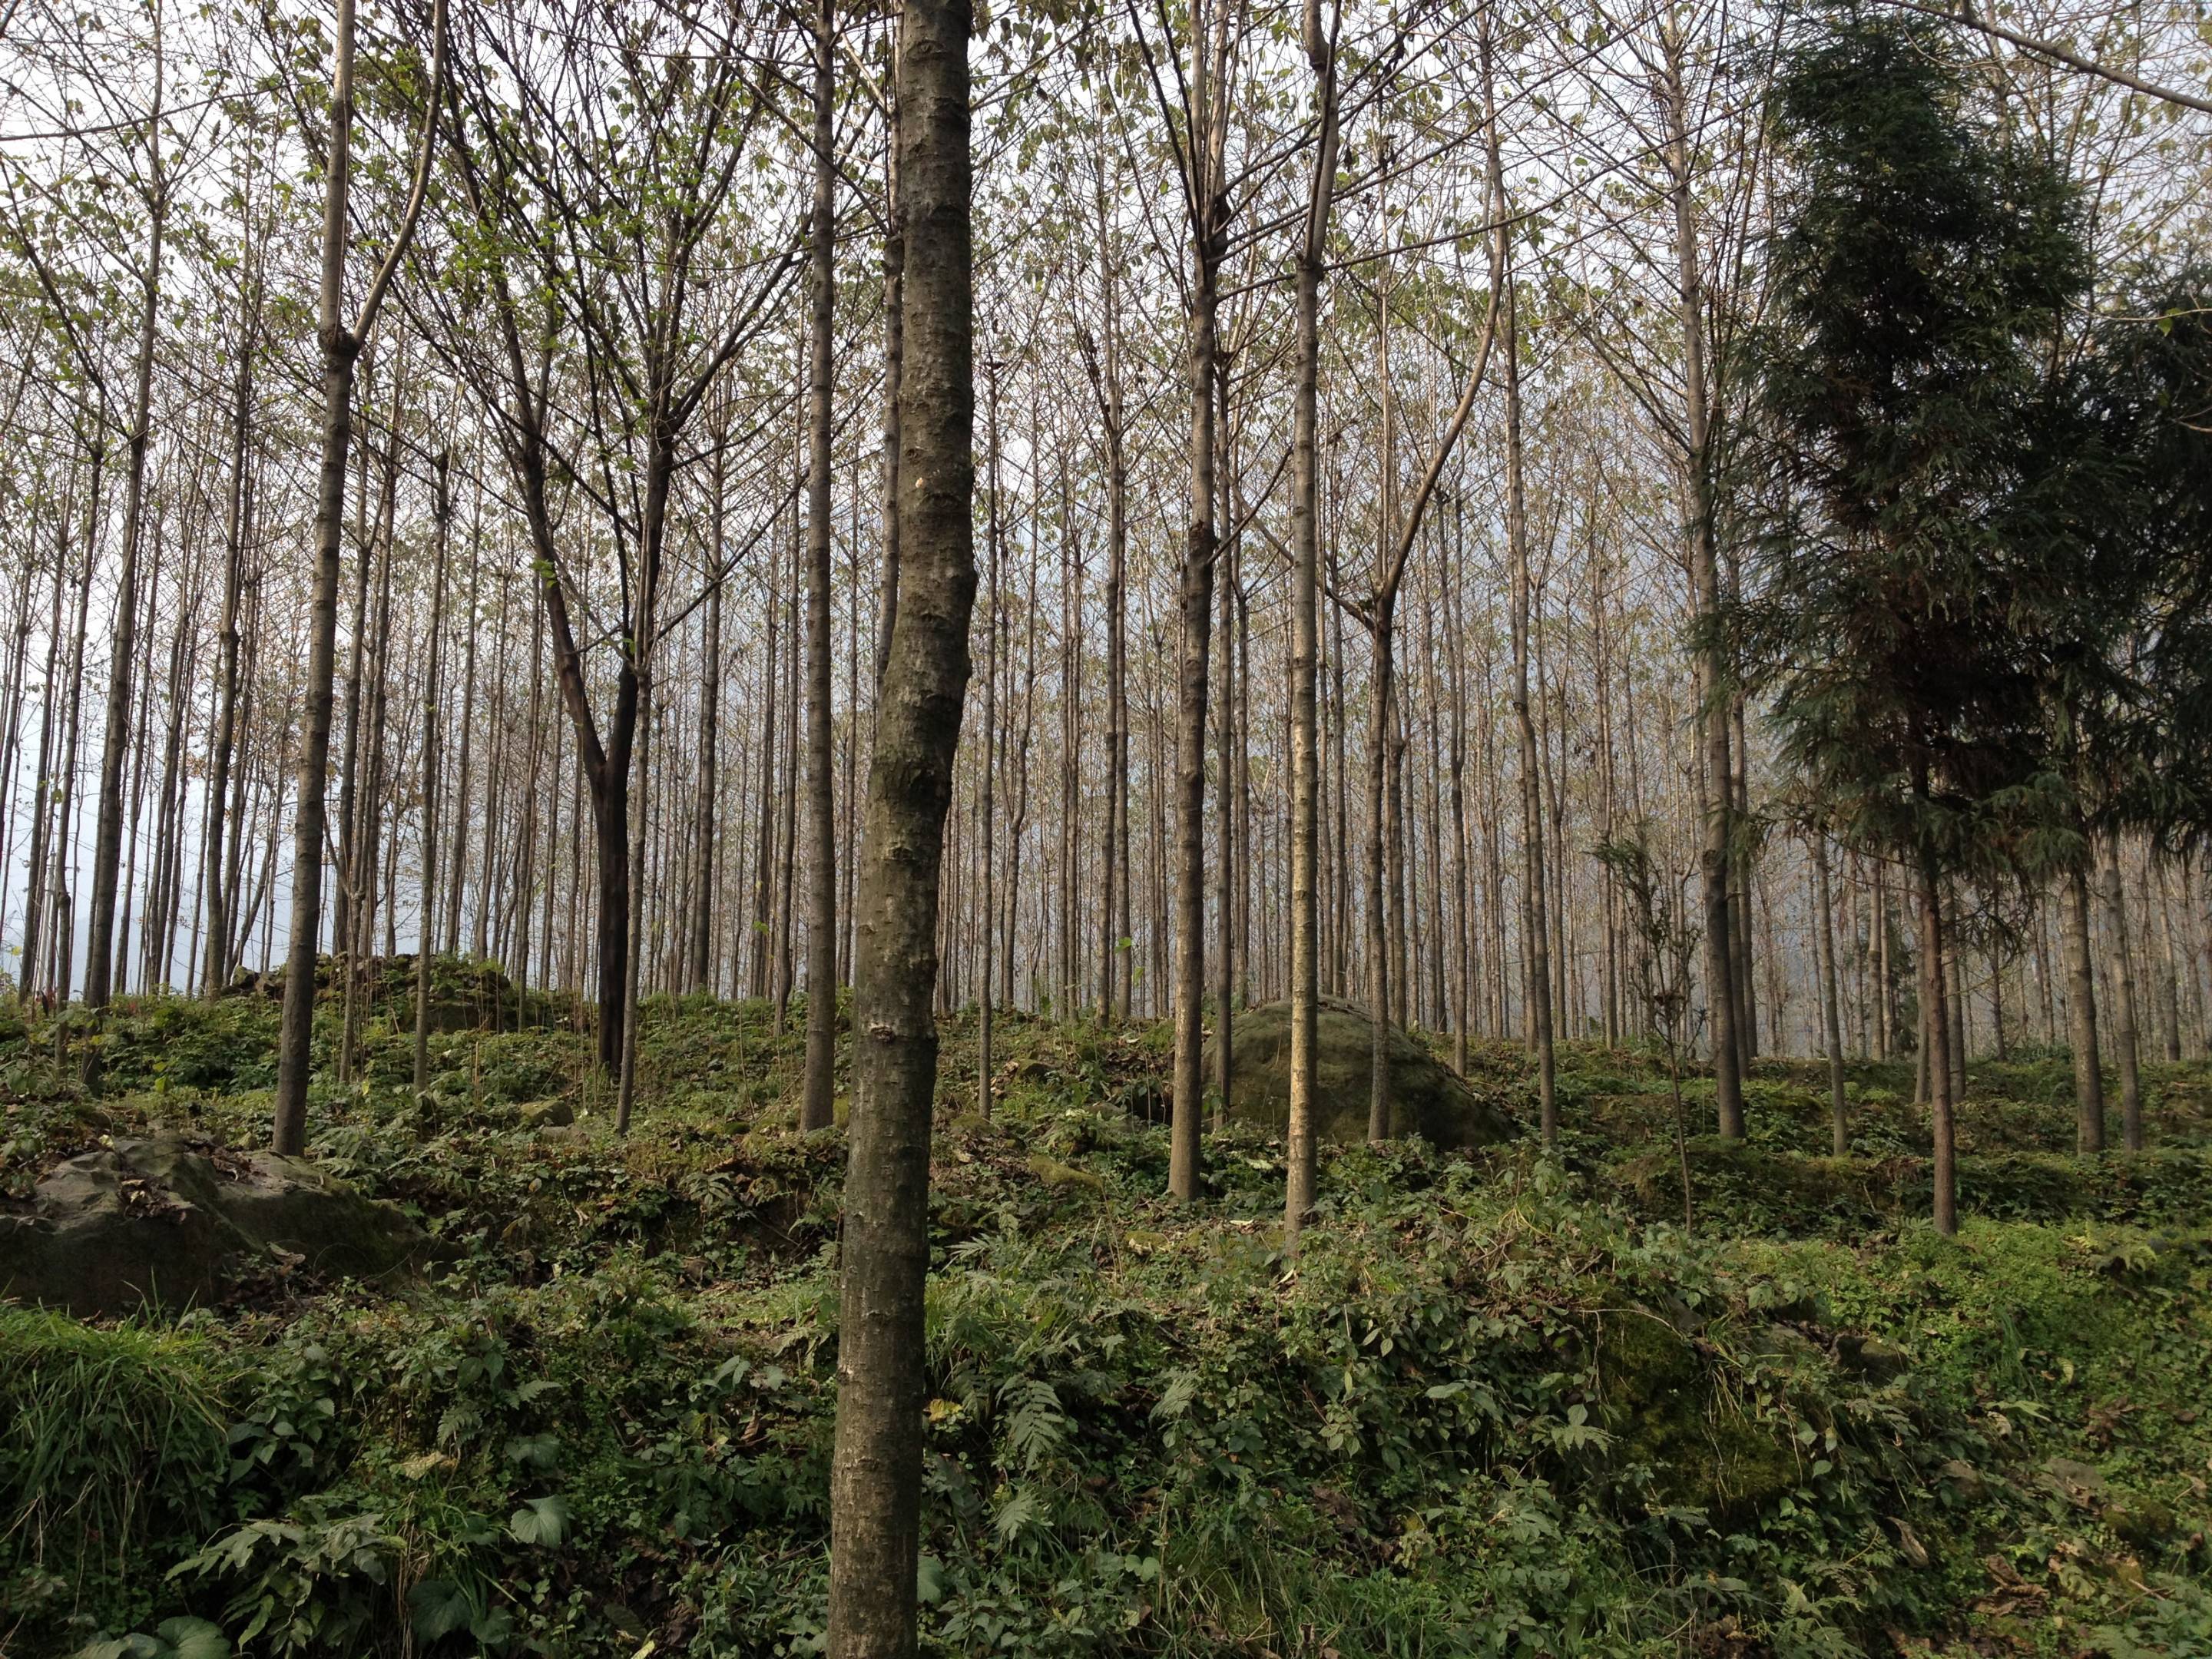 Survival and restoration of China's native forests imperiled by ...